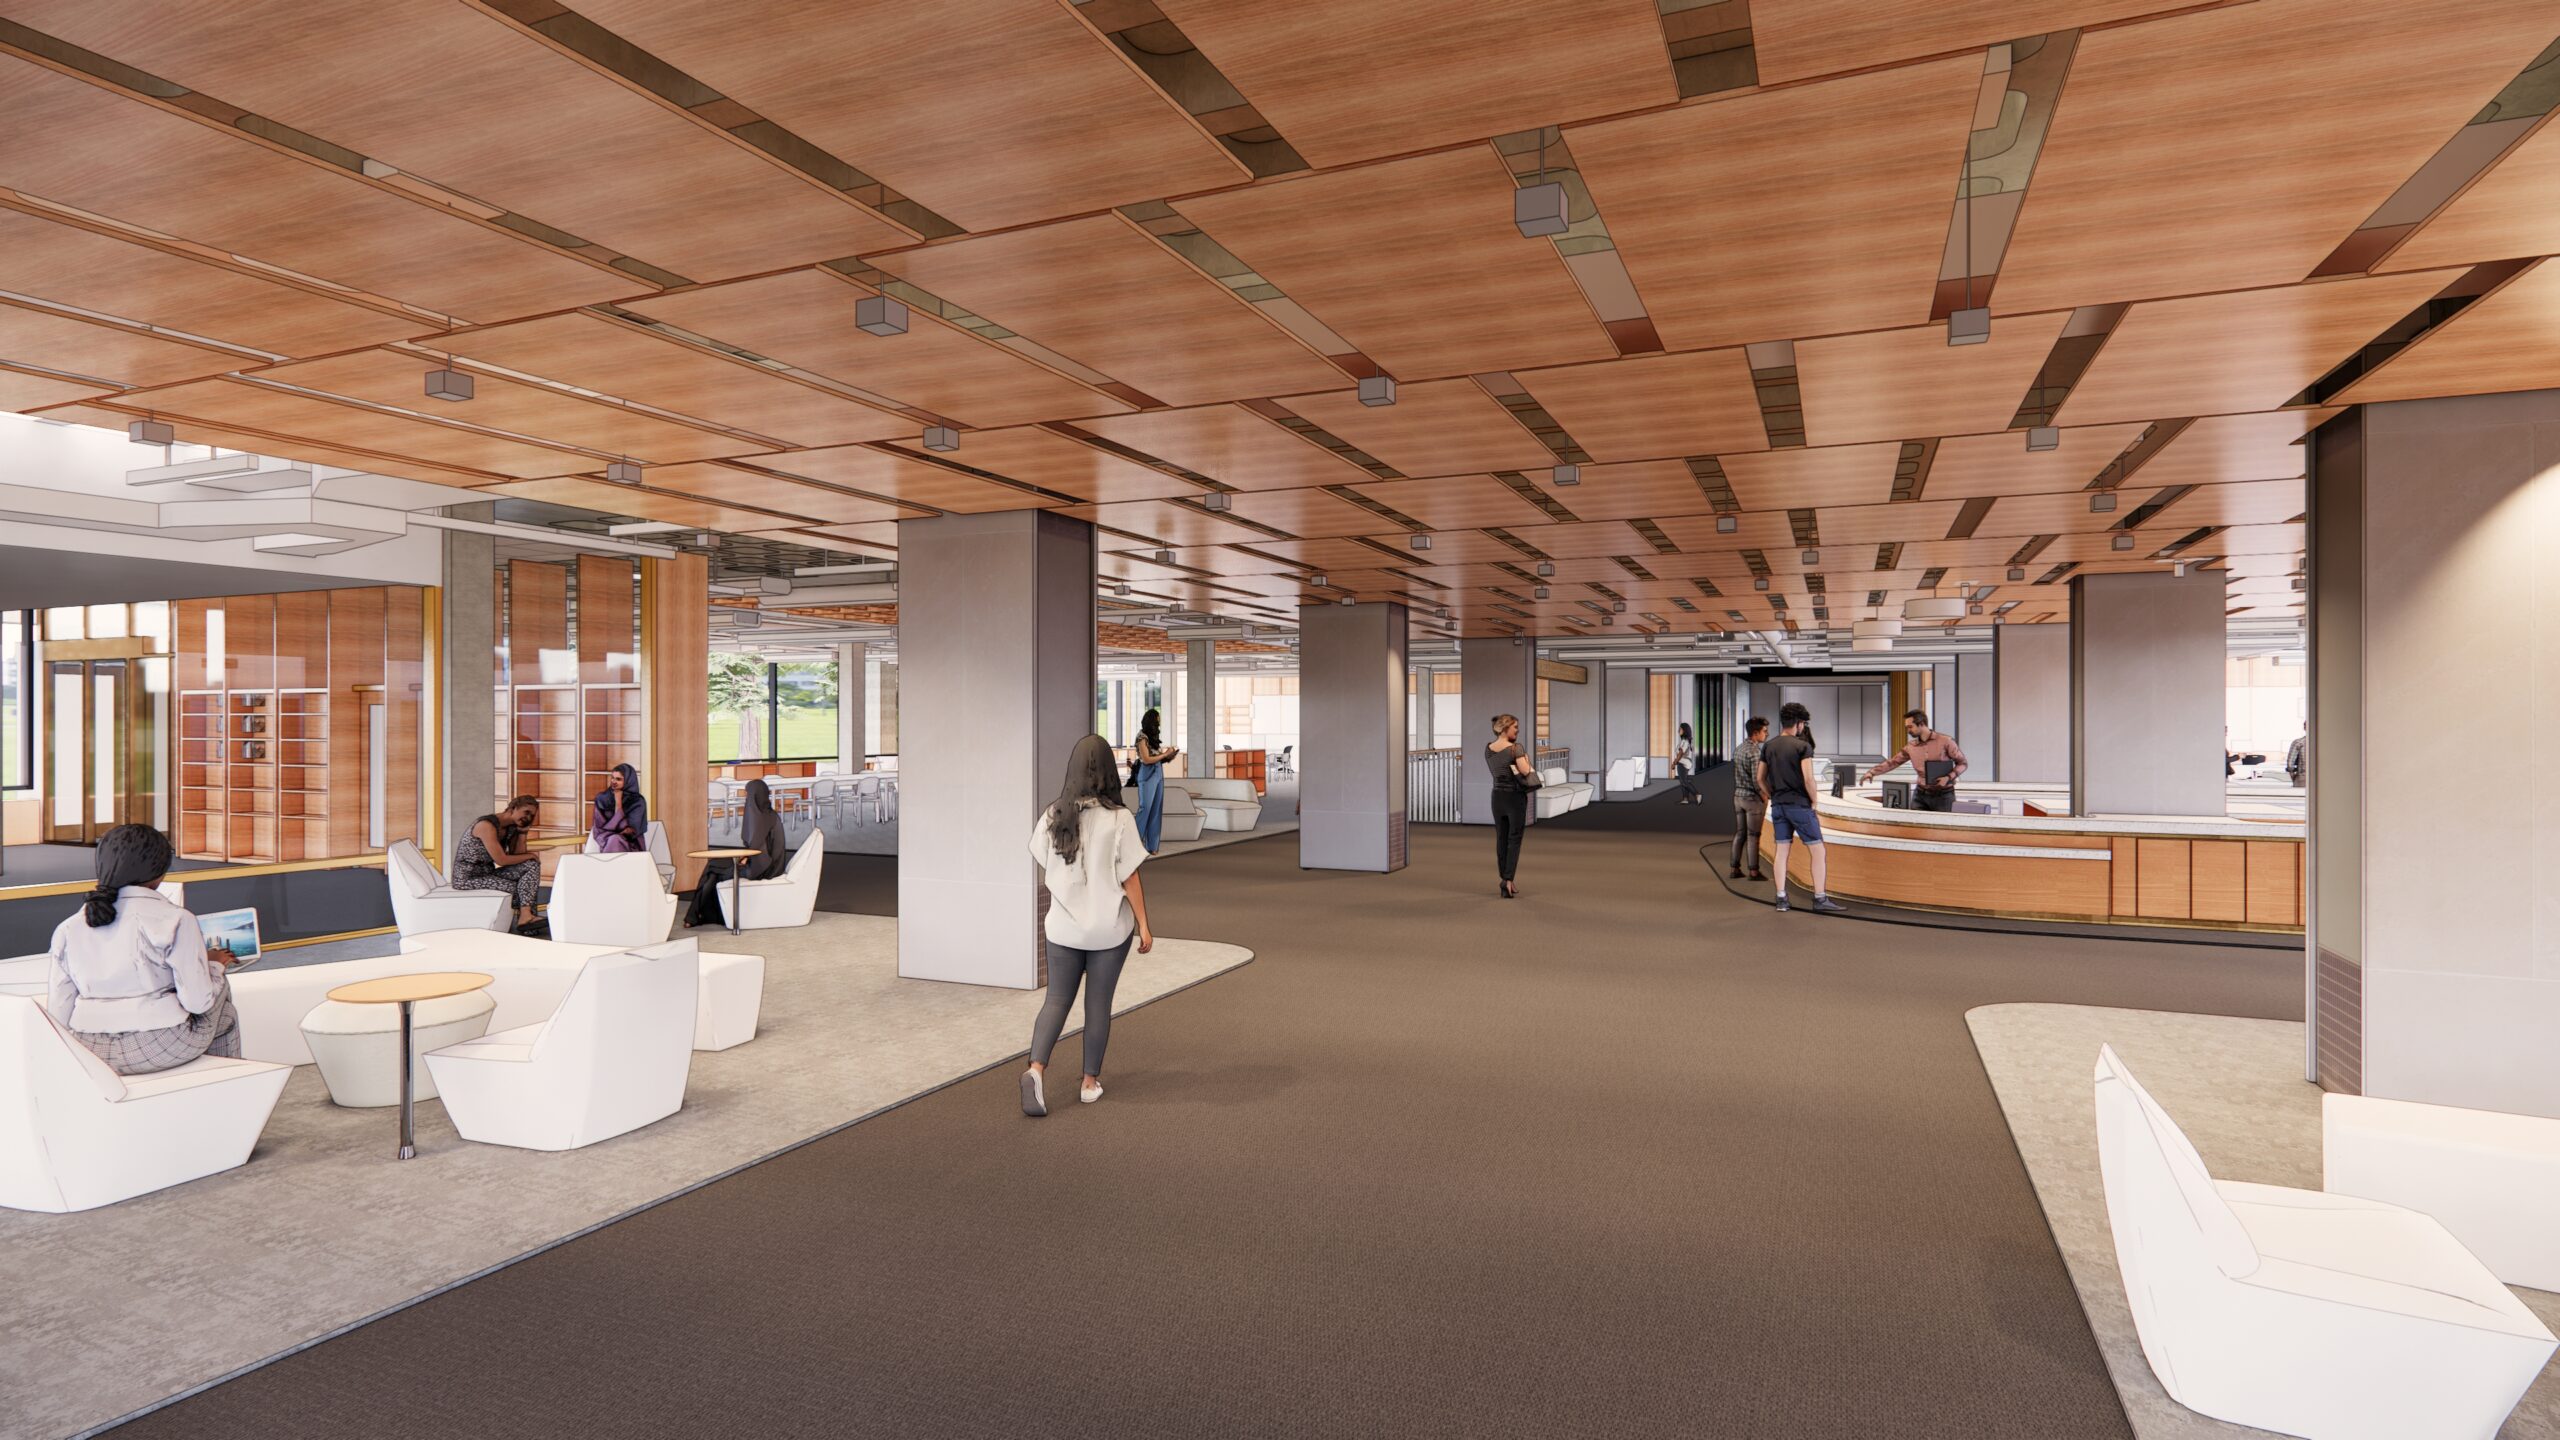 Architectural rendering of renovated Olin Library space